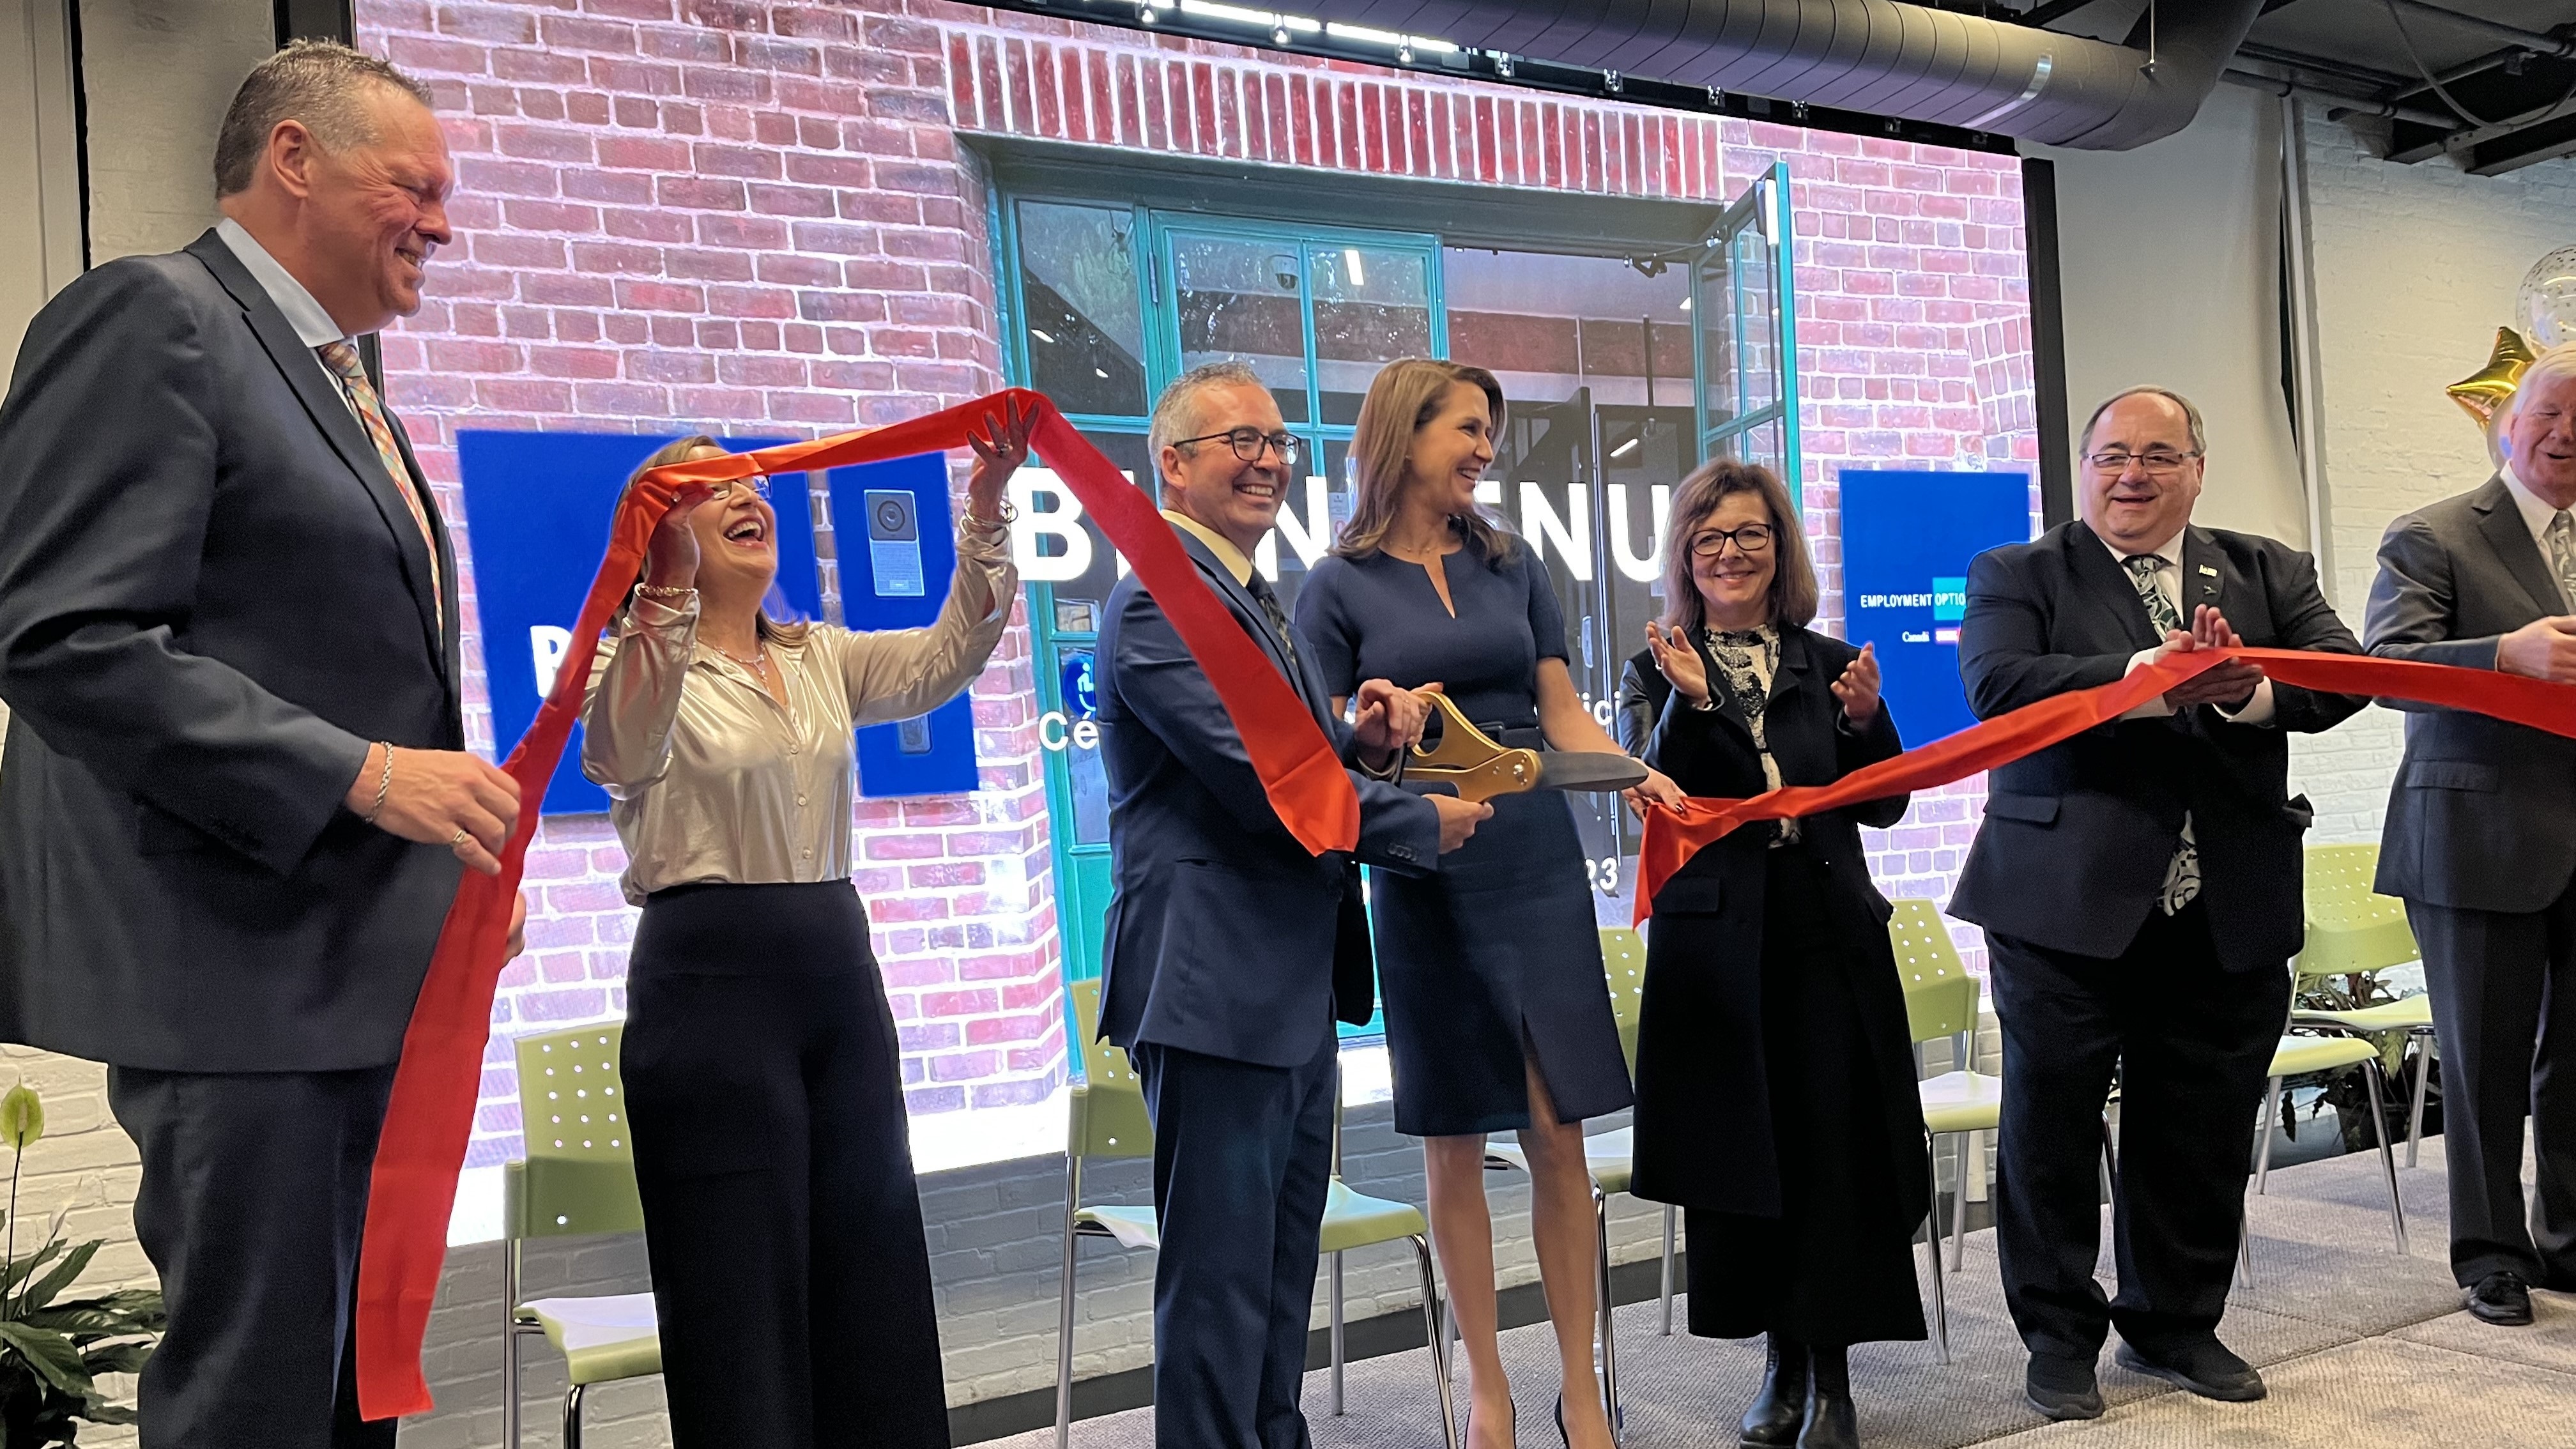 People celebrating during a ribbon-cutting ceremony at Collège Boréal’s new Toronto campus in the Distillery Historic District.